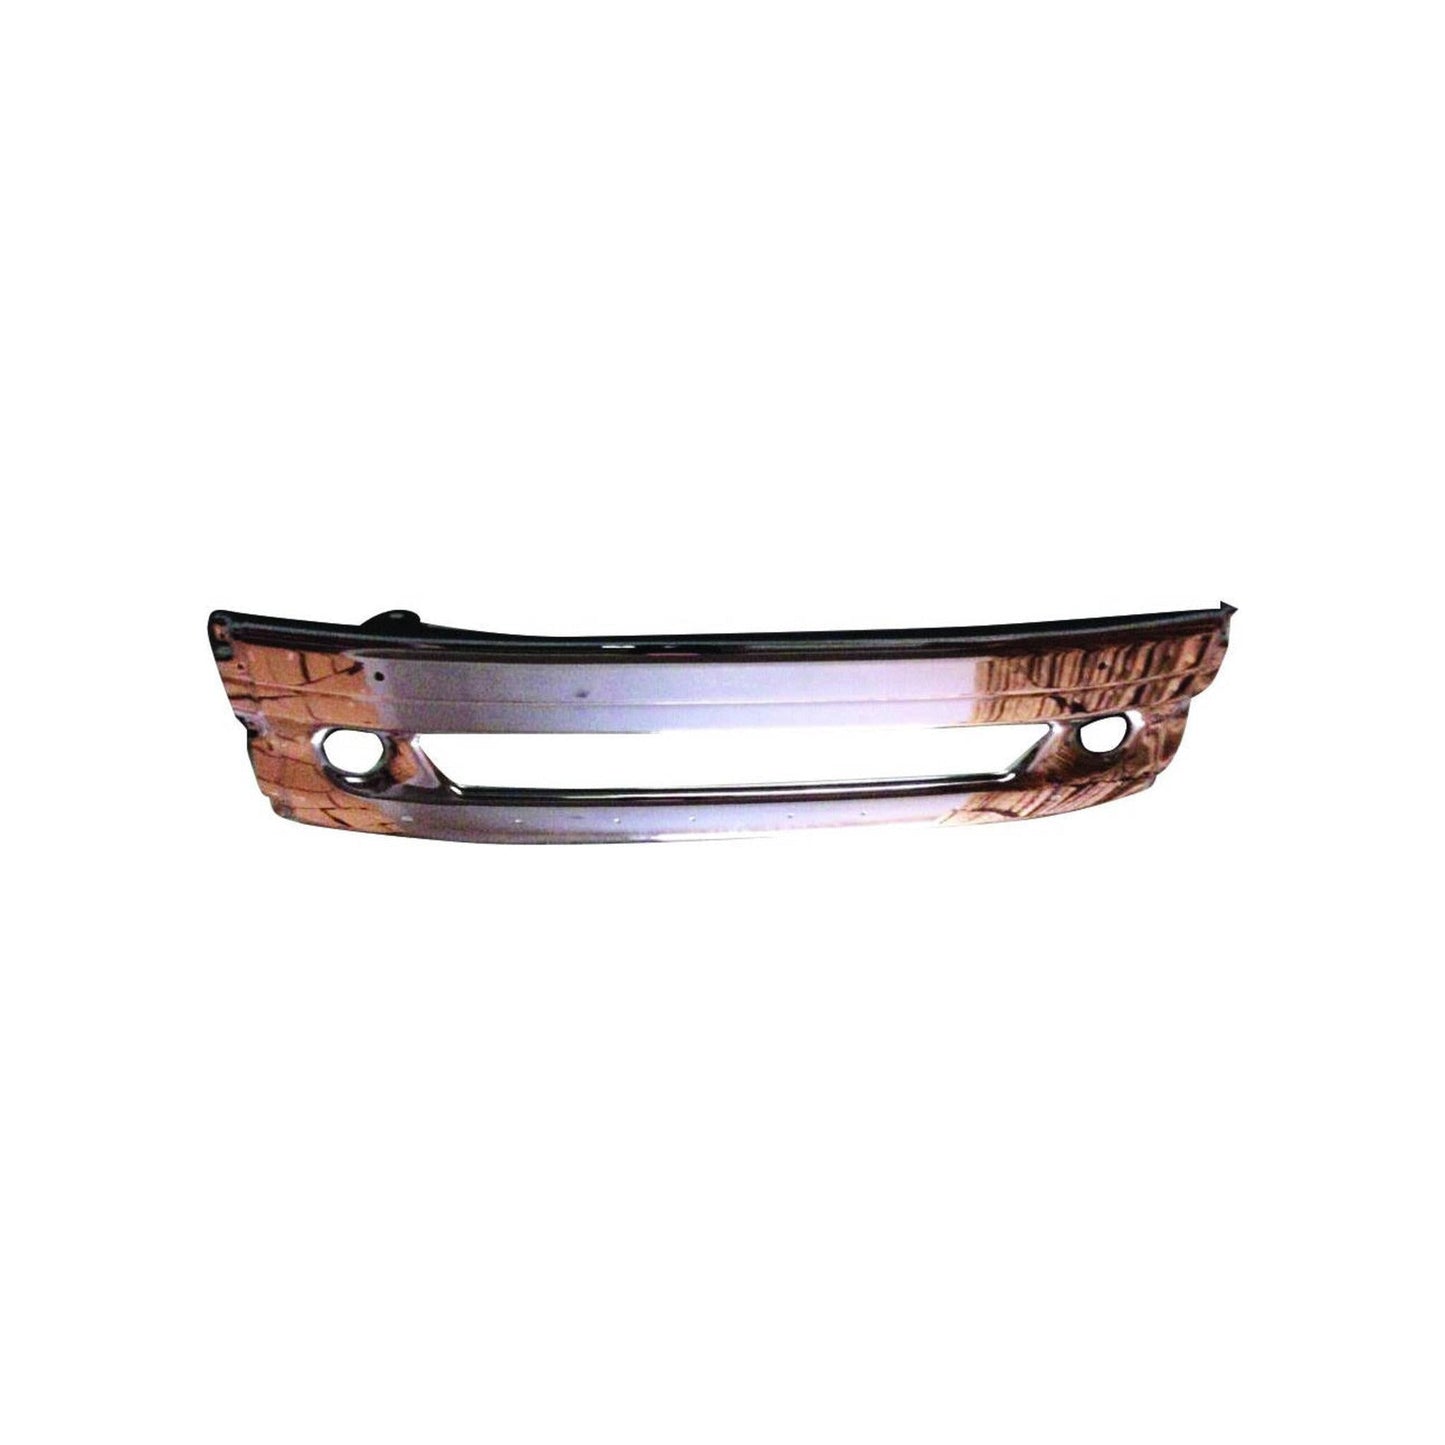 Chrome Steel Front Bumper for Columbia Replaces 21-26021-006